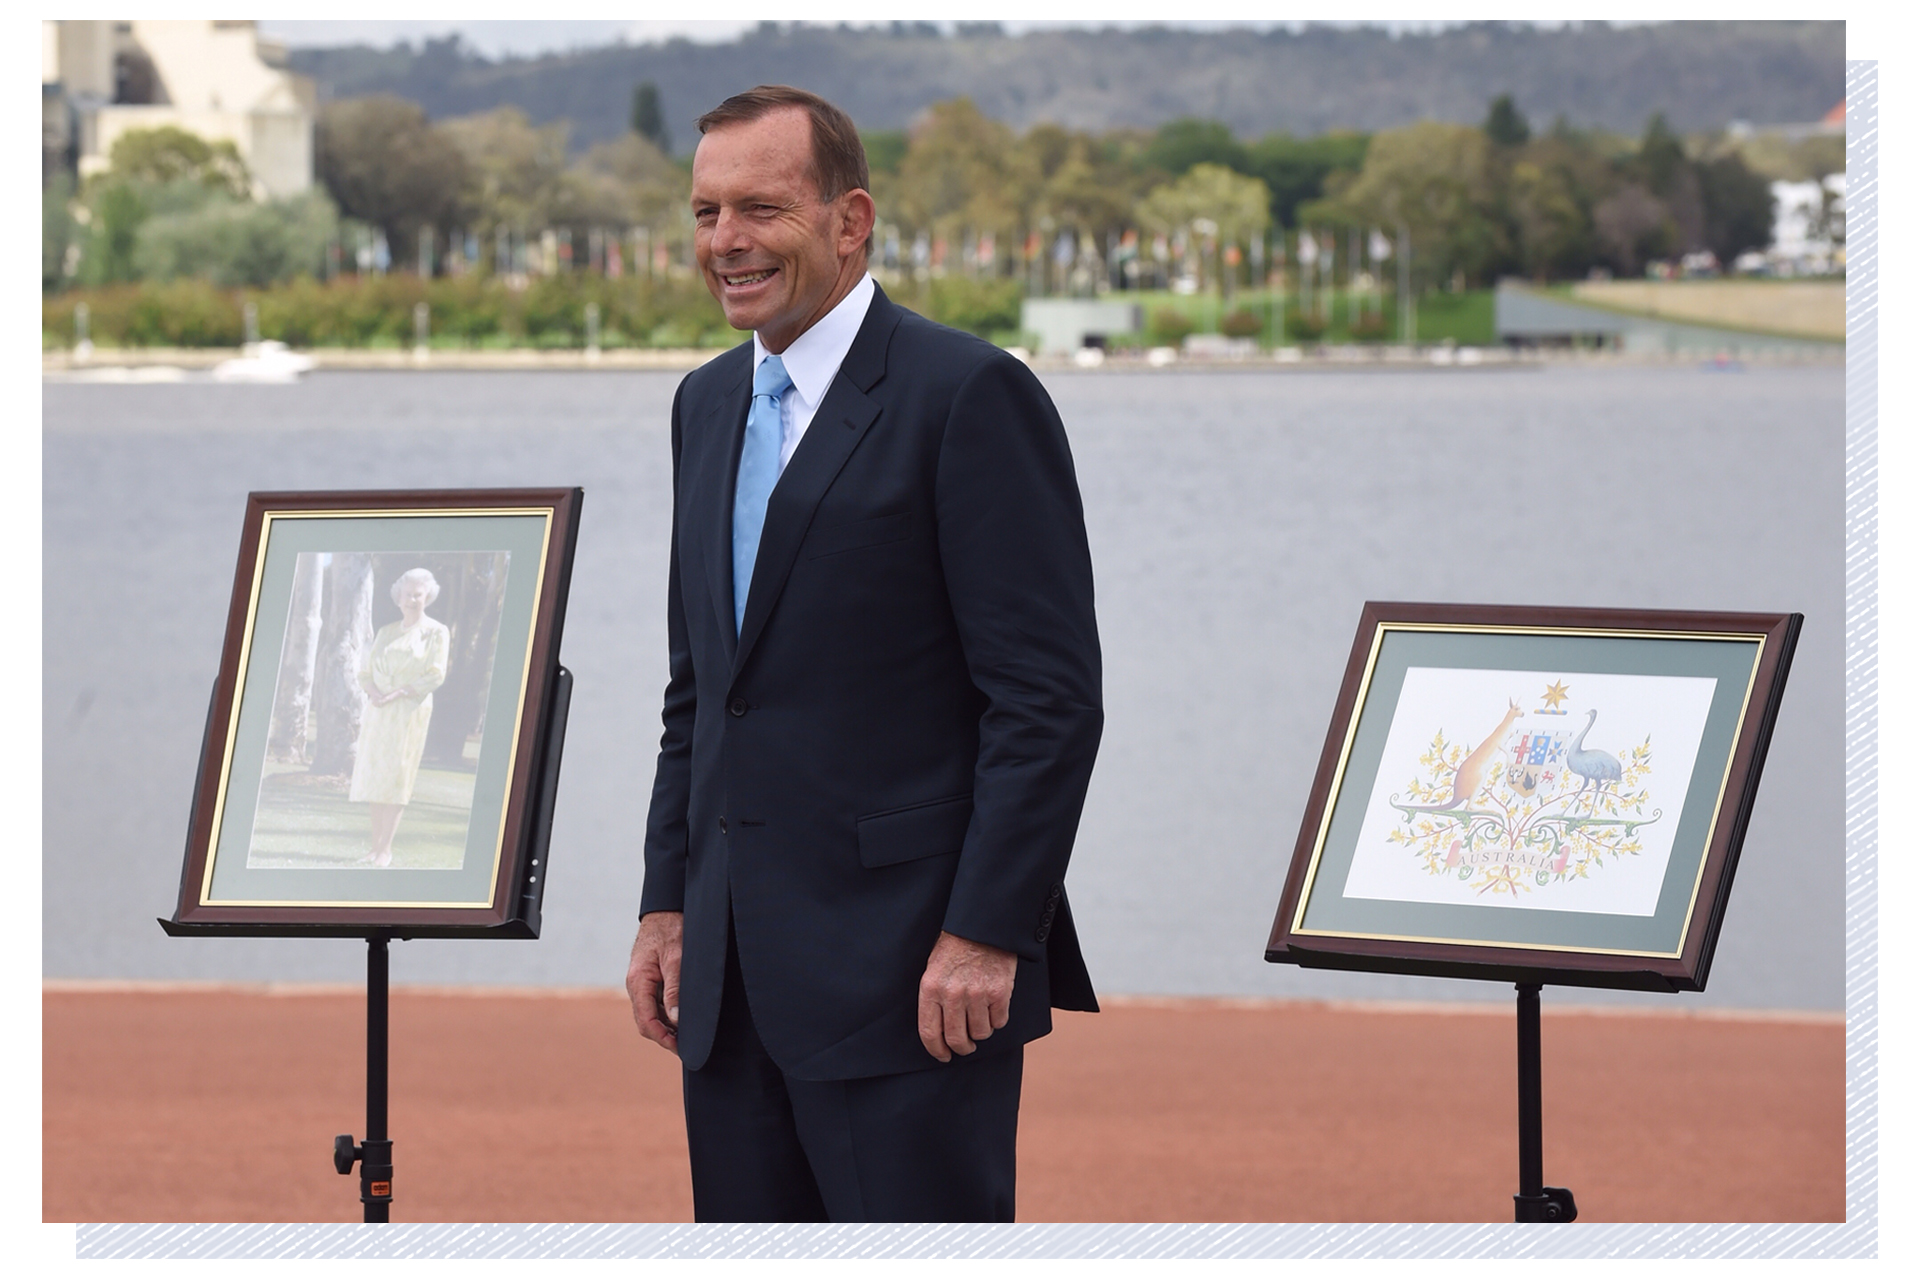 Tony Abbott stands next to a portrait of the Queen.